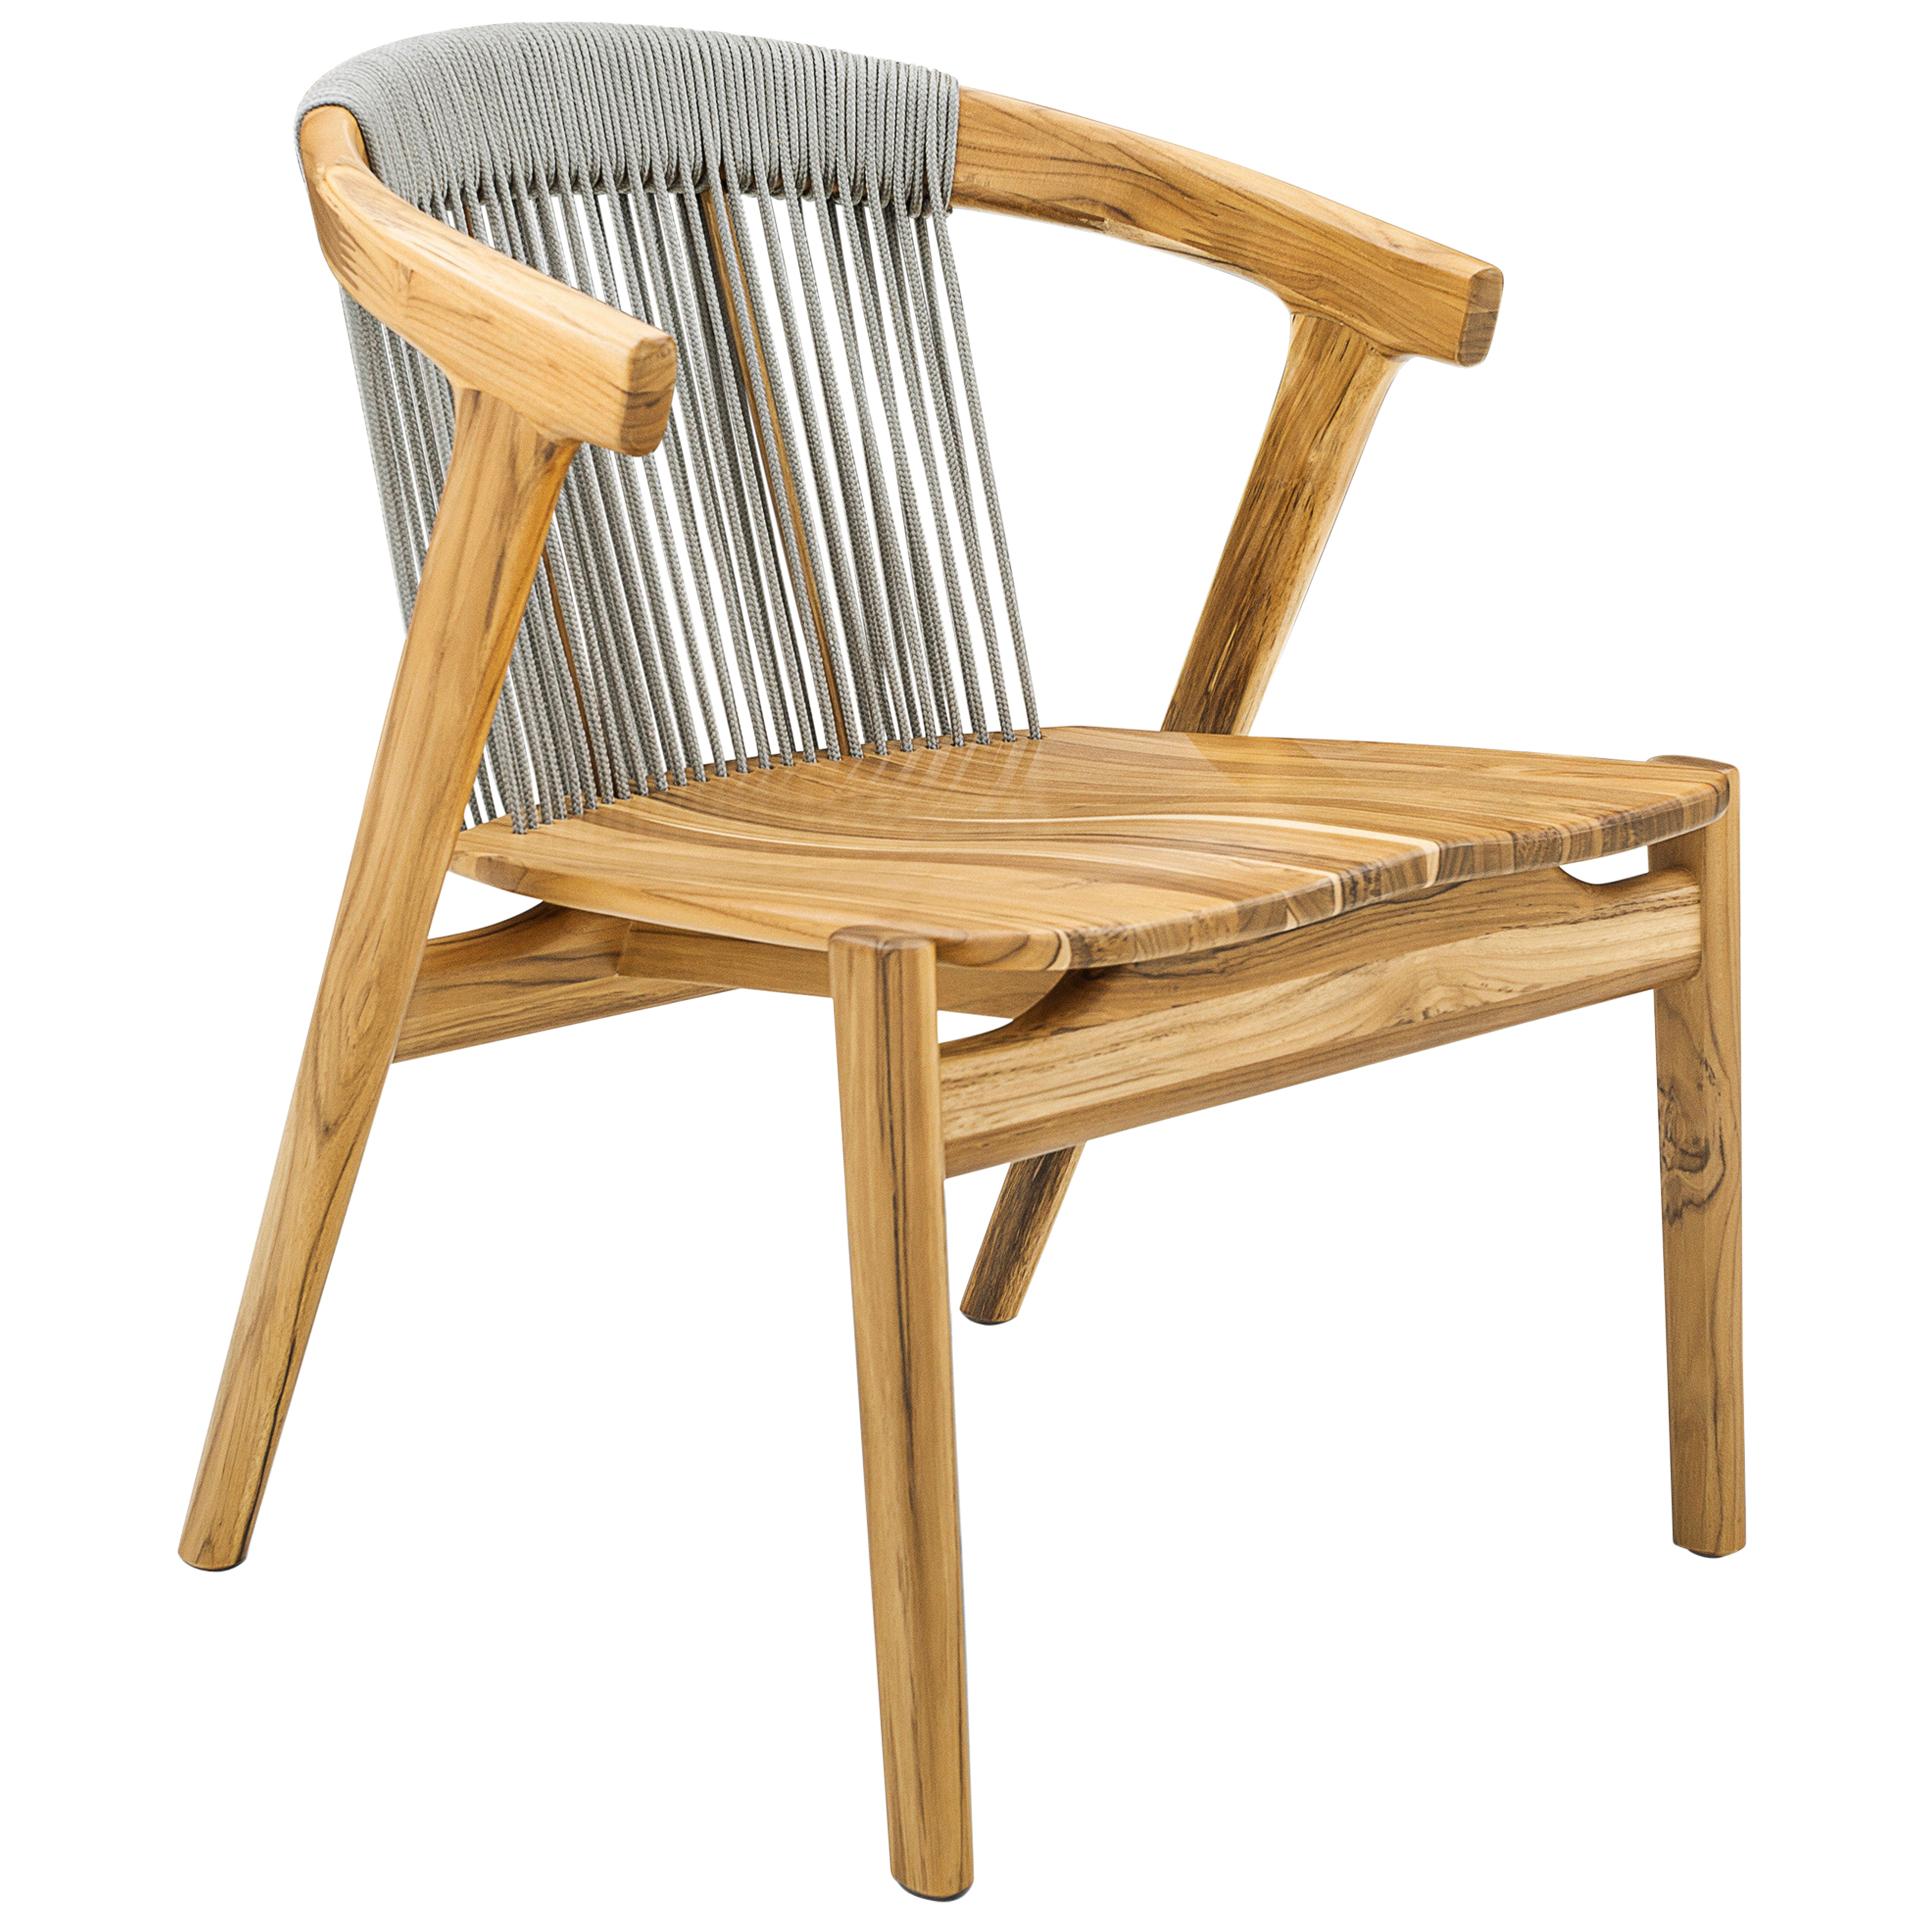 Vine Outdoor Dining Chair in Teak Wood with Silver Rope